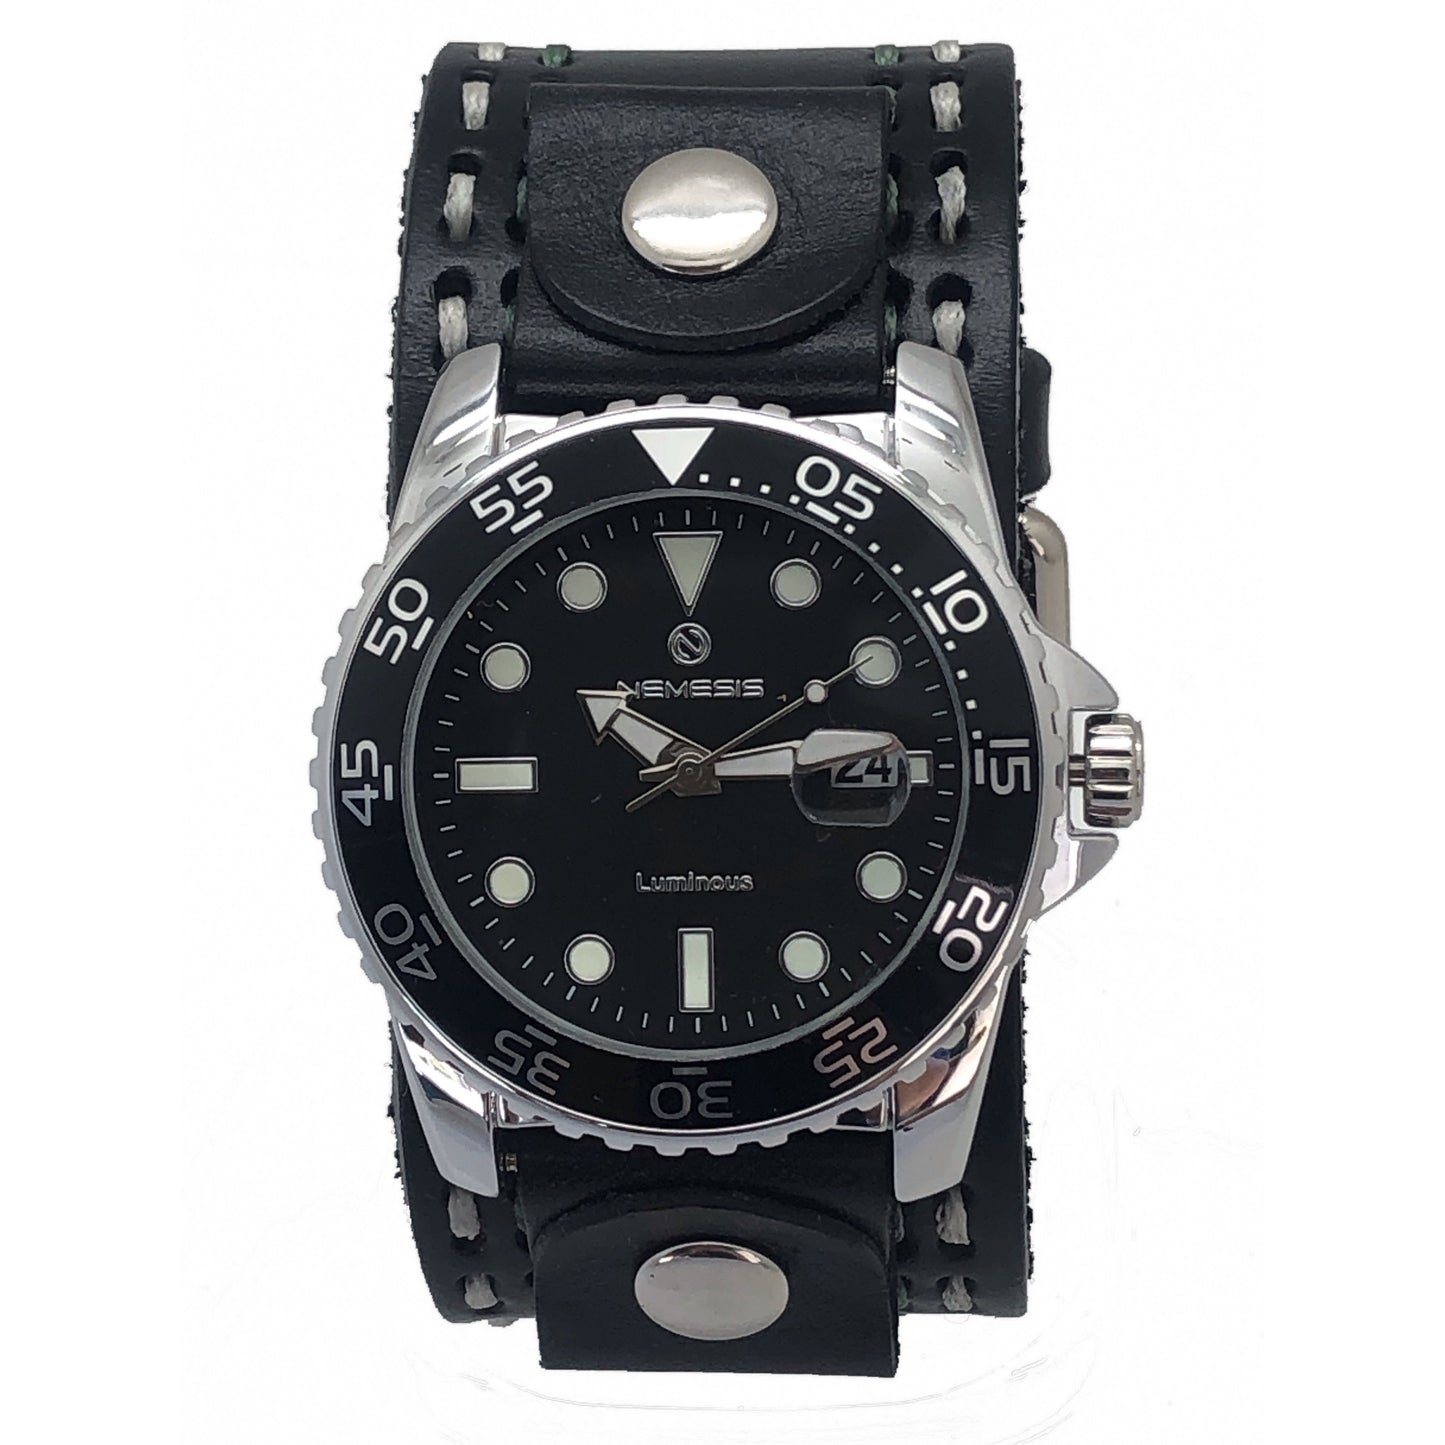 Moonwalker 8 hours super Luminous bright Black Diver with Double White/Grey Stitched Black Leather Cuff  KDST277K